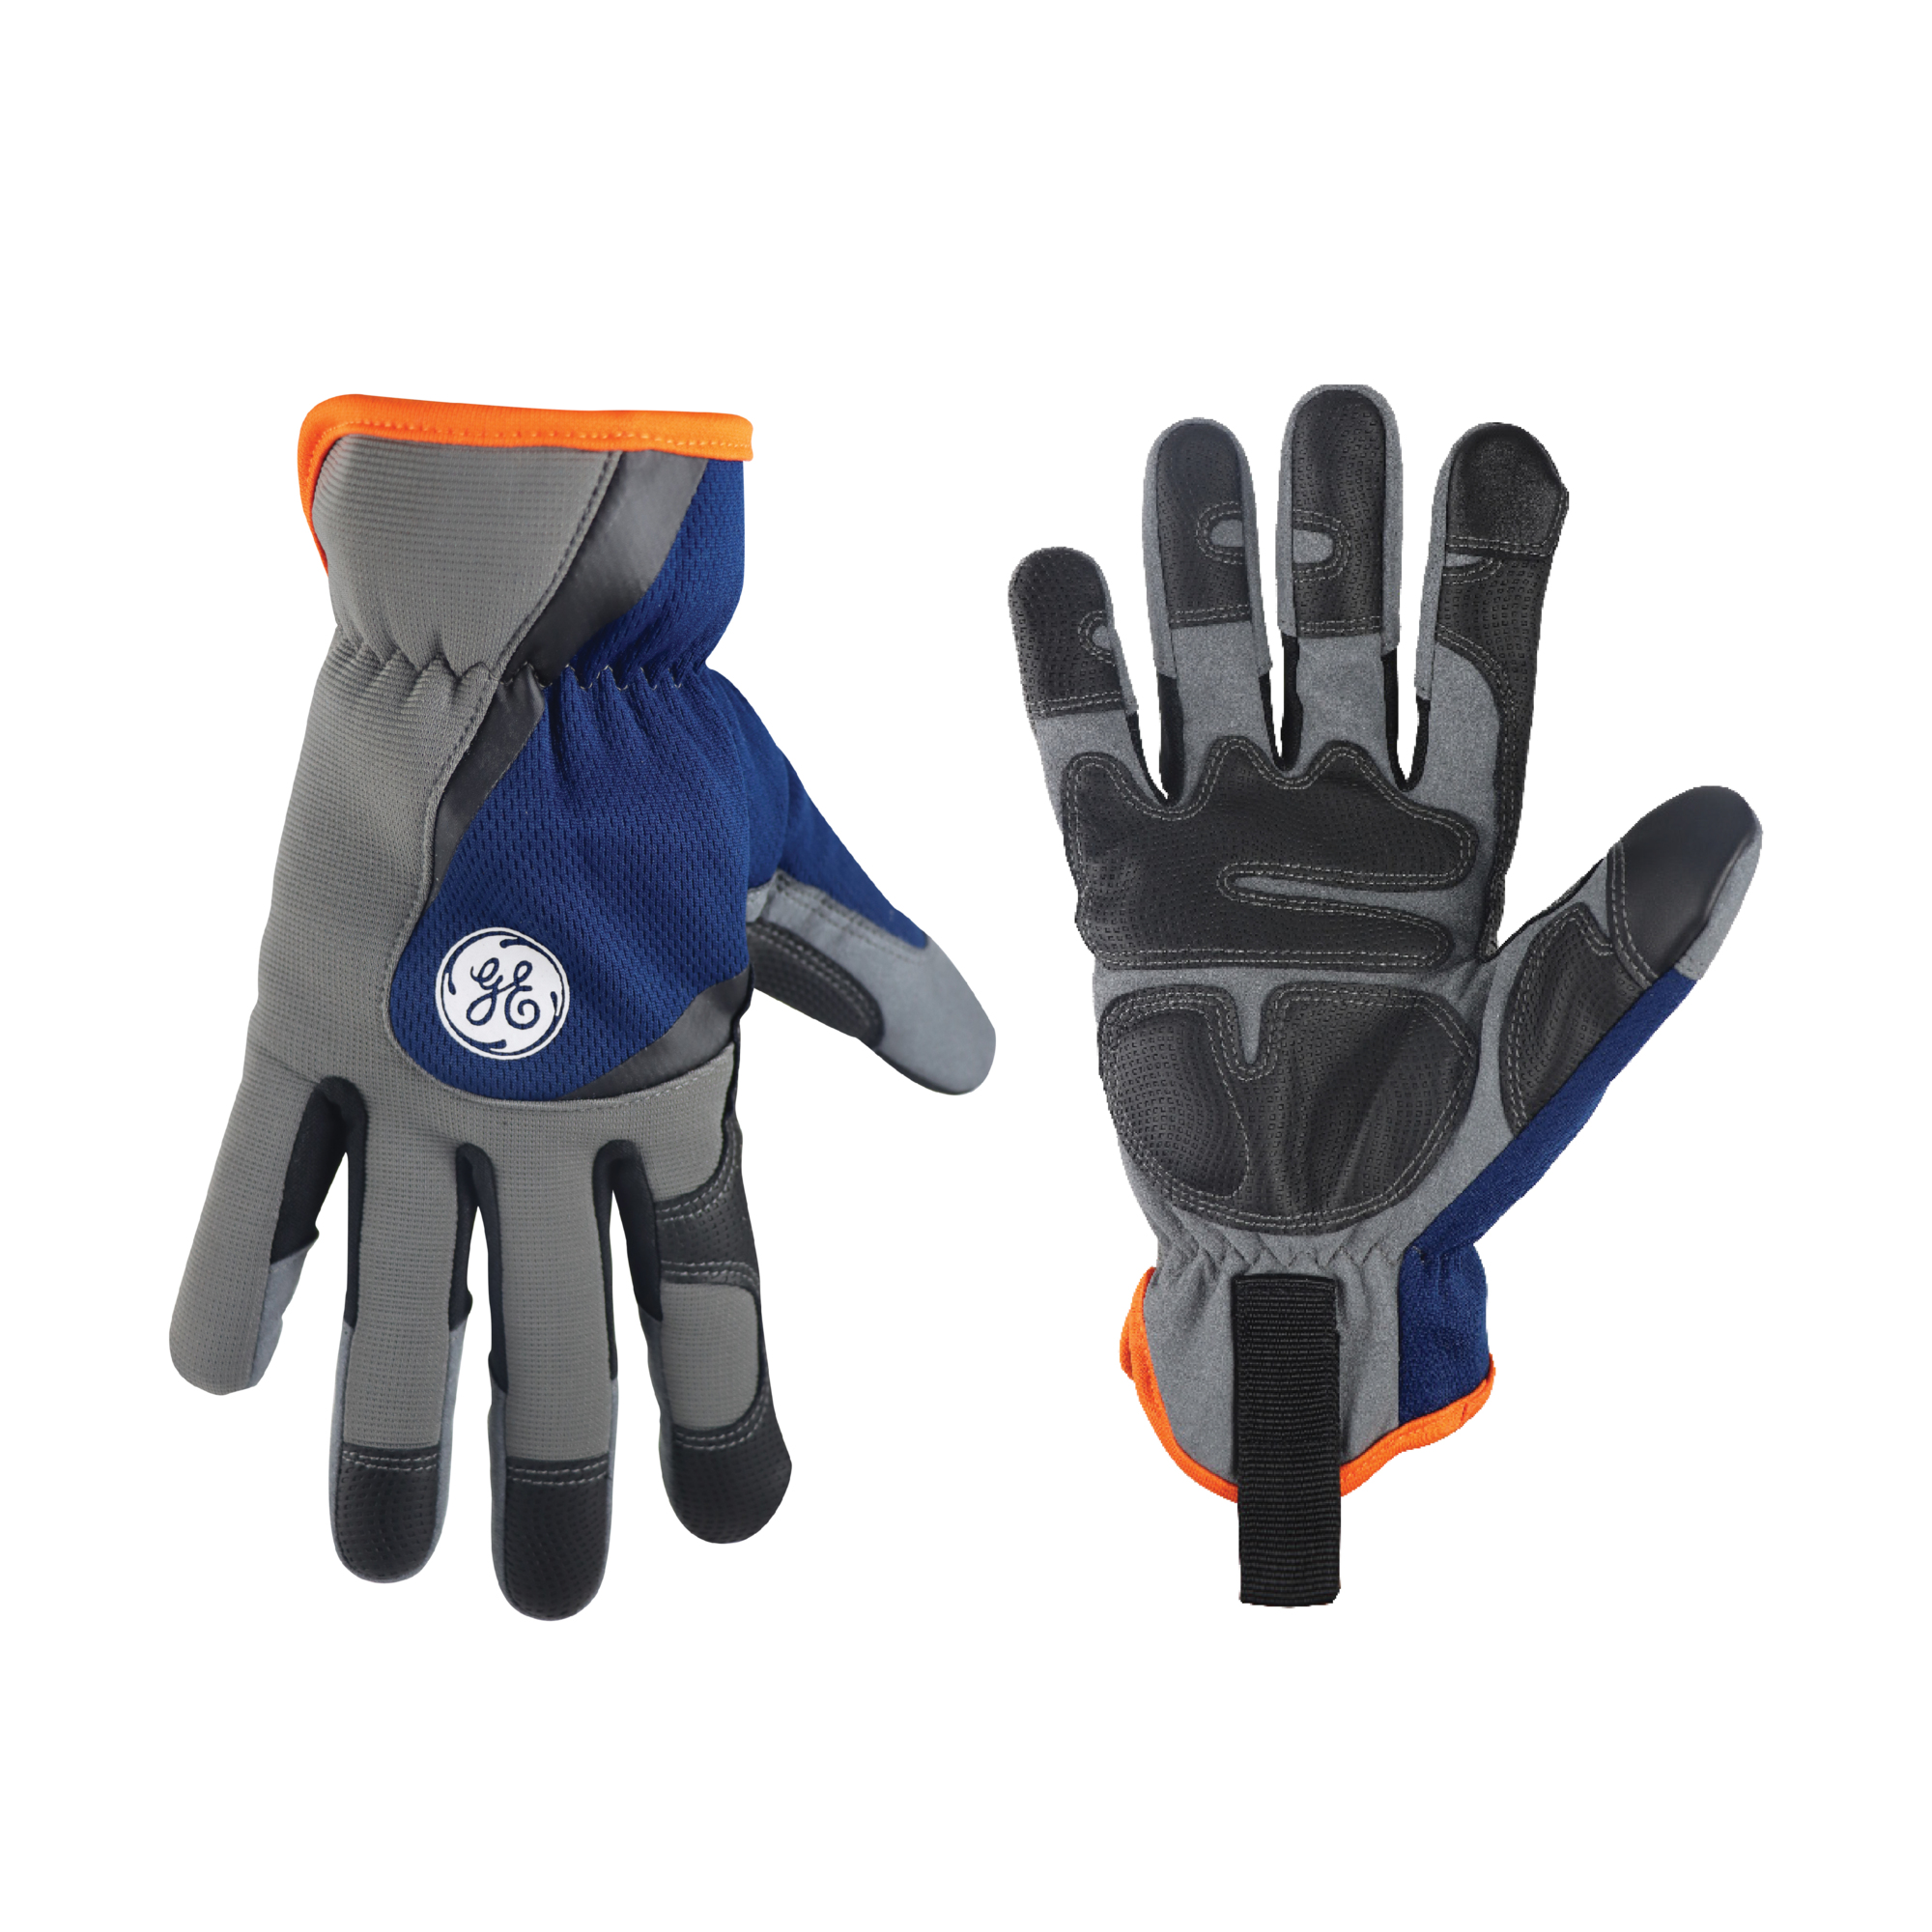 General Electric, Mechanic's Glove Multicolor XL 1 pair, Size XL, Included (qty.) 1, Model GG410XLC